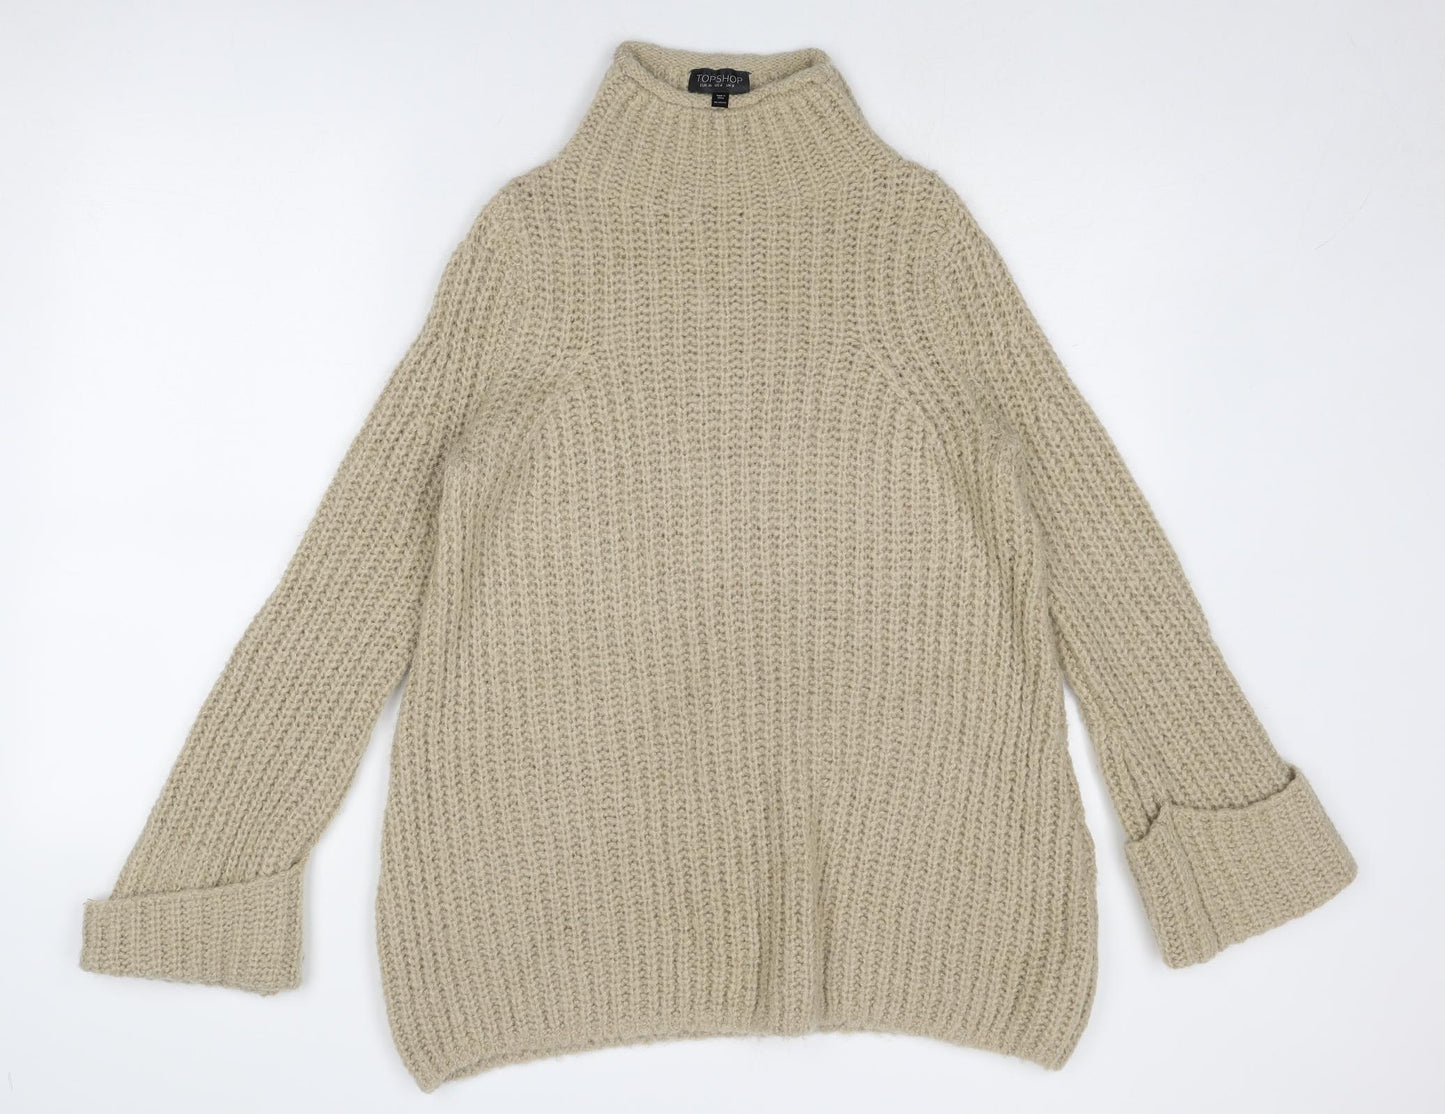 Topshop Womens Beige High Neck Acrylic Pullover Jumper Size 8